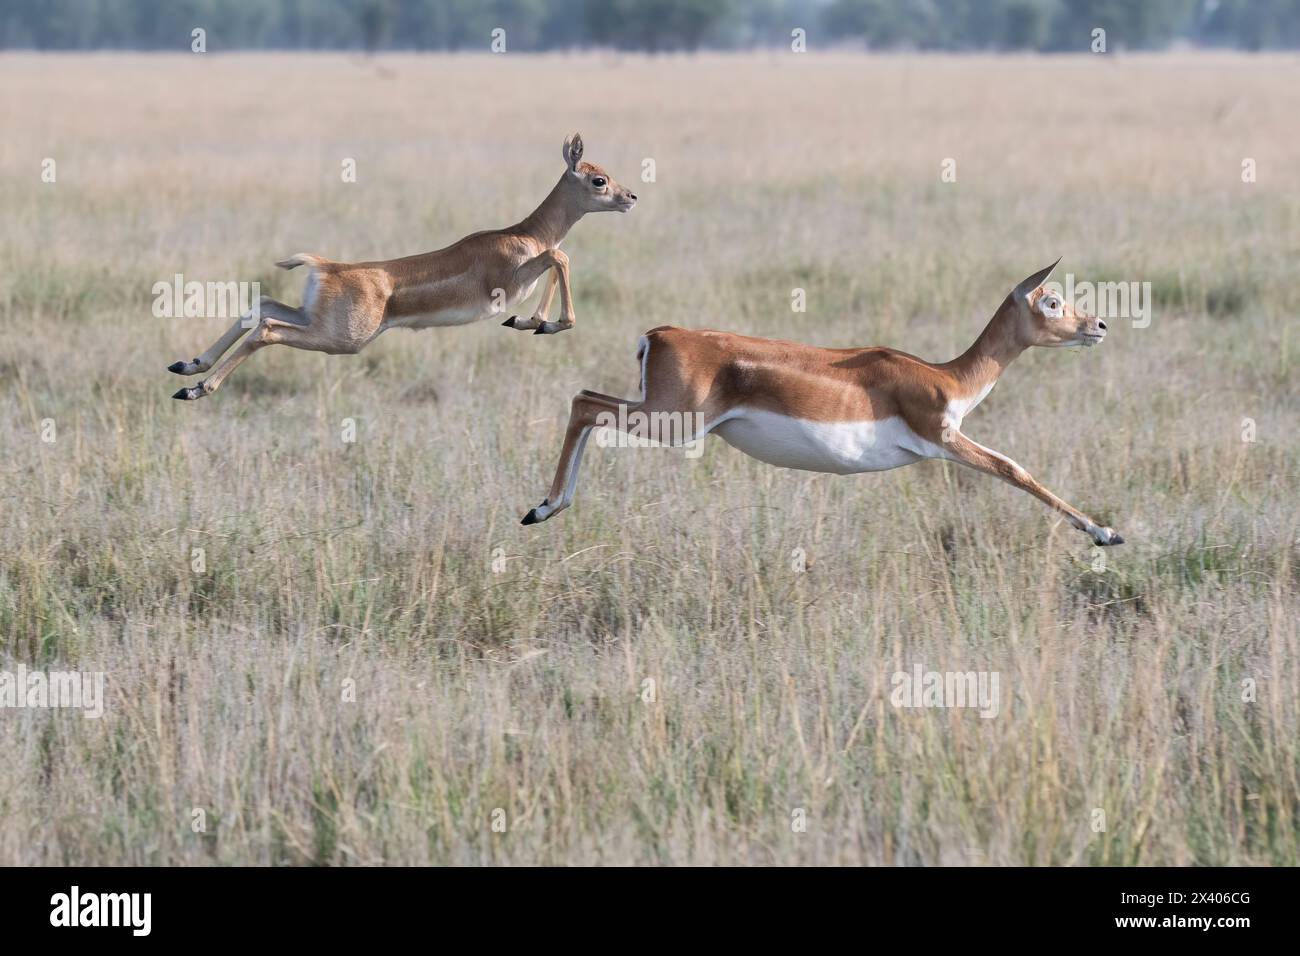 A mother and baby fawn running in synch with jumping motion in the grasslands inside Blackbuck Sanctury in Tal Chappar, Rajasthan during a wildlife sa Stock Photo